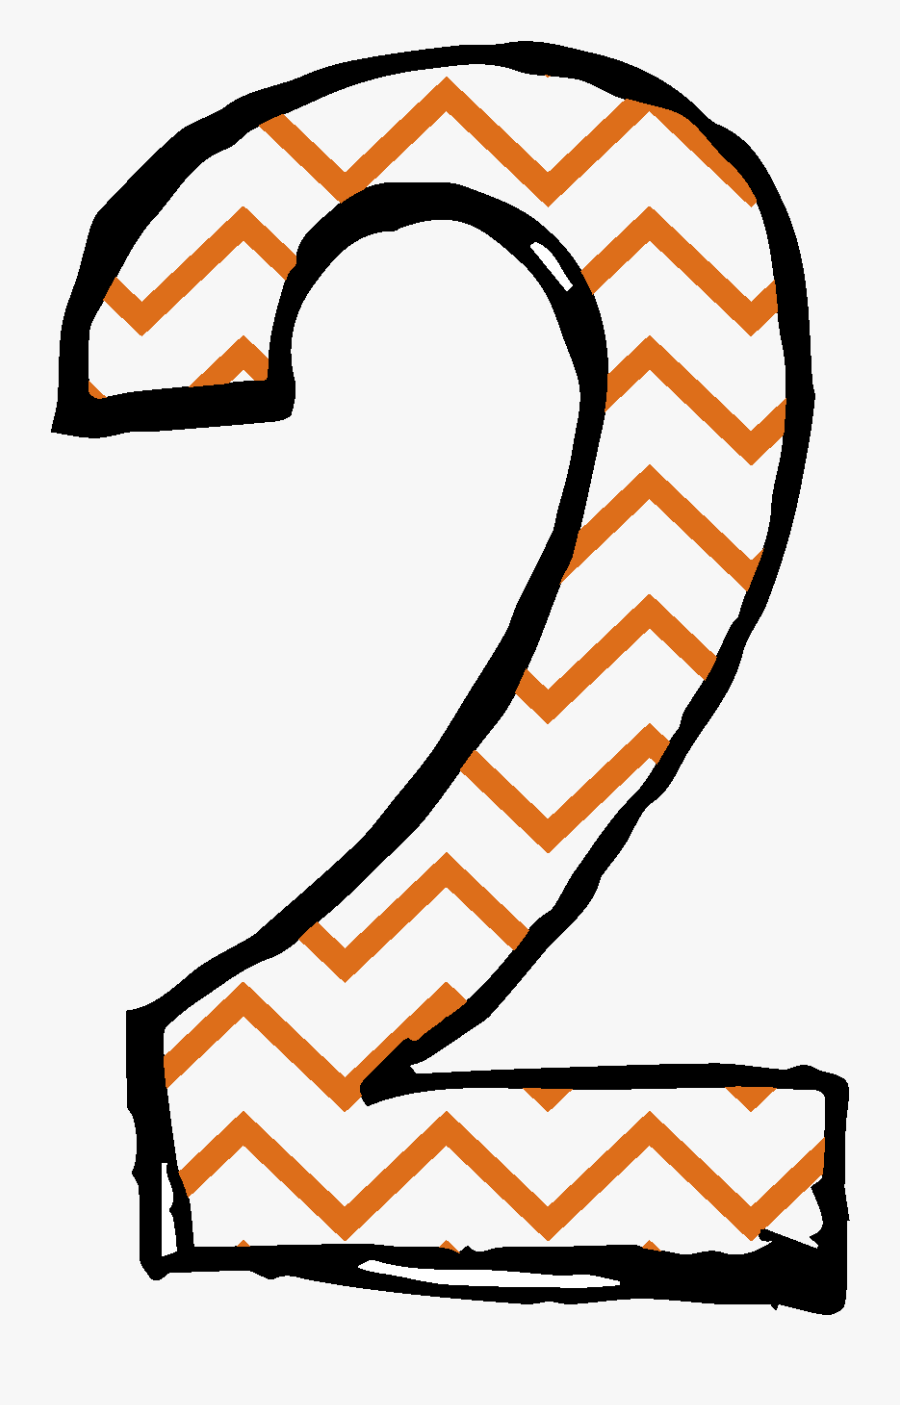 Cute Number 2 Png, Transparent Clipart